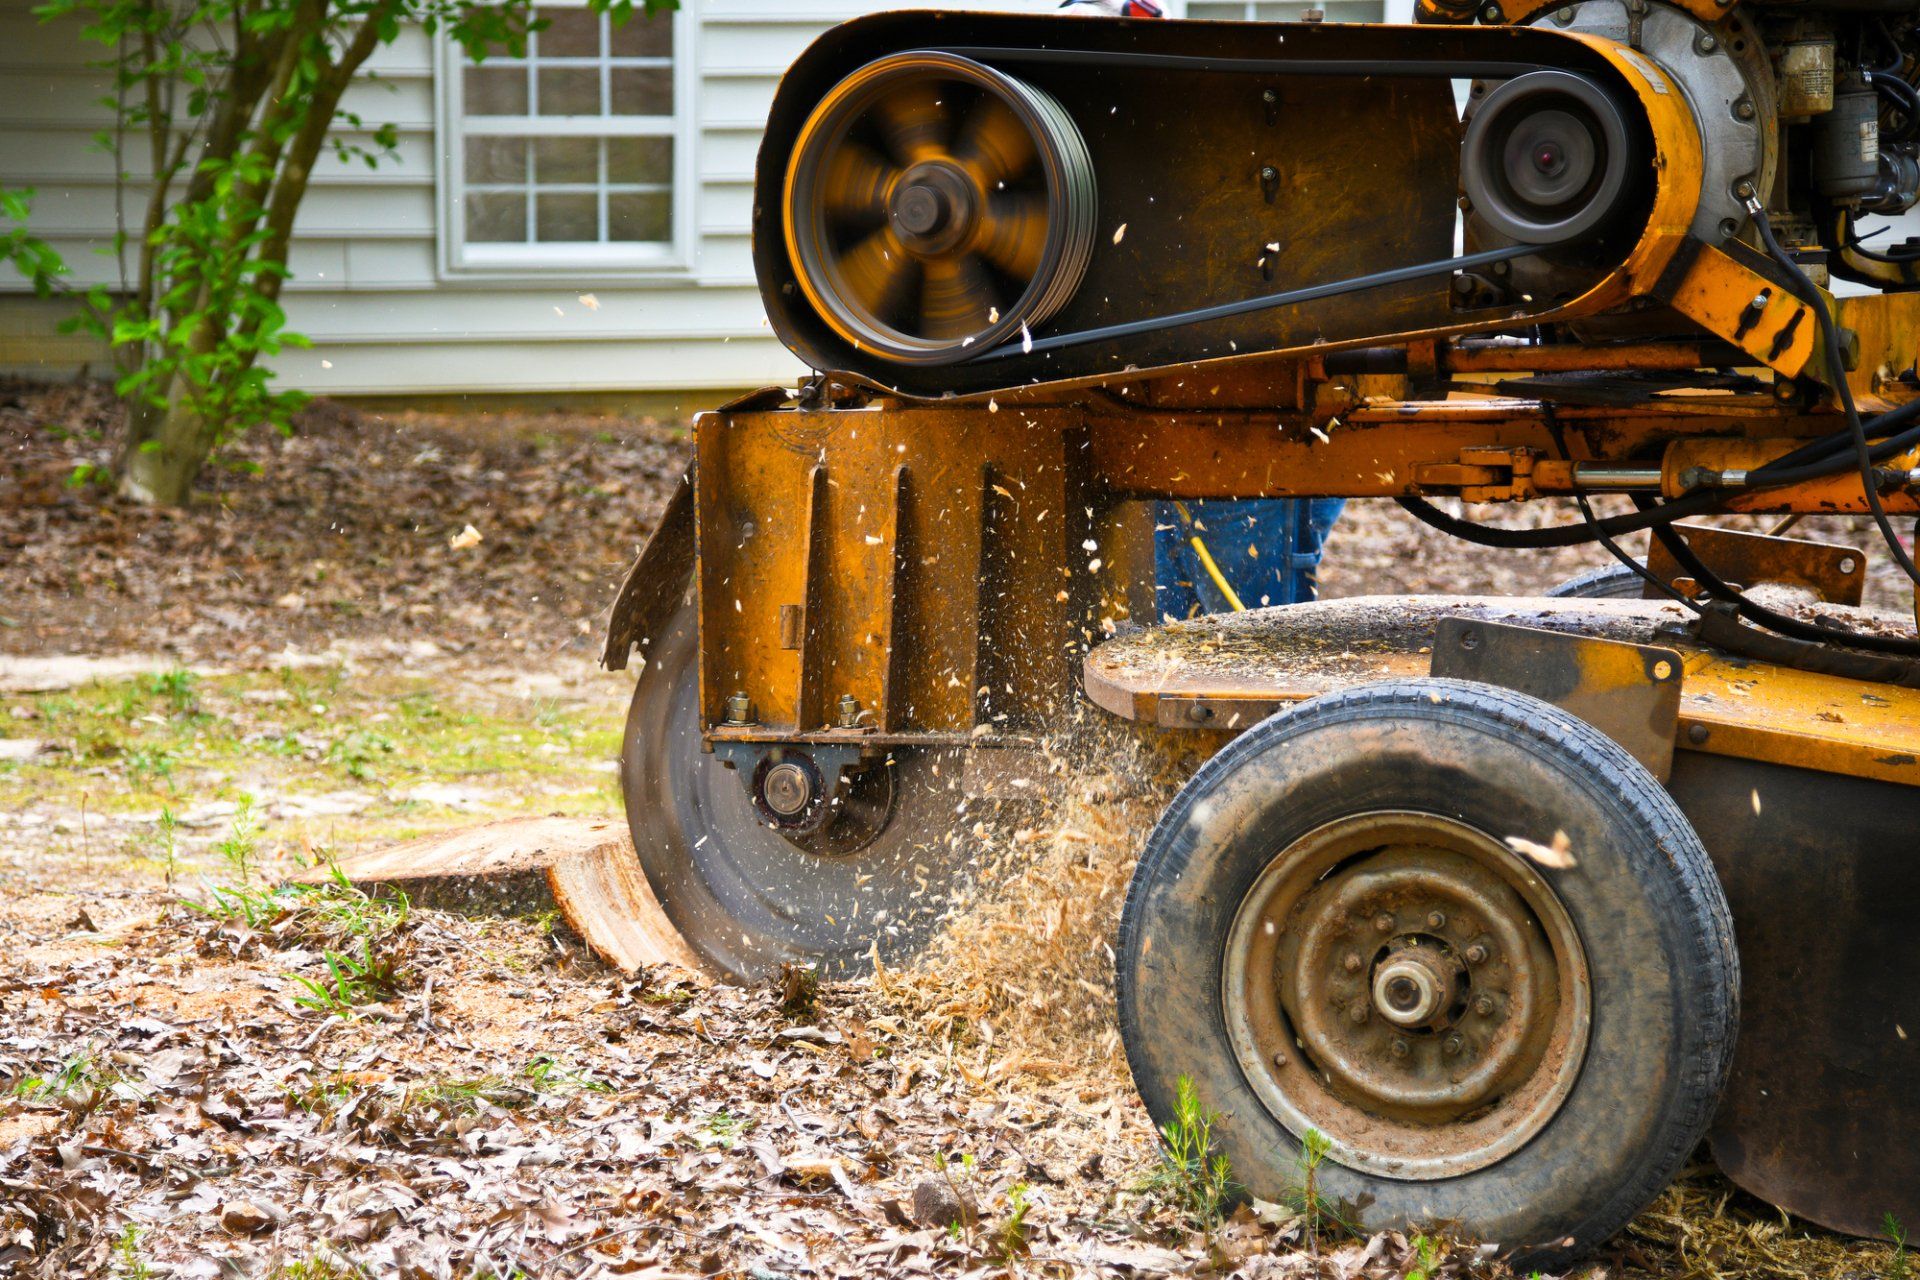 Real Tree Team's specialized stump grinding machine is used to grind used in removing unsightly tree stumps in Lighthouse Point FL